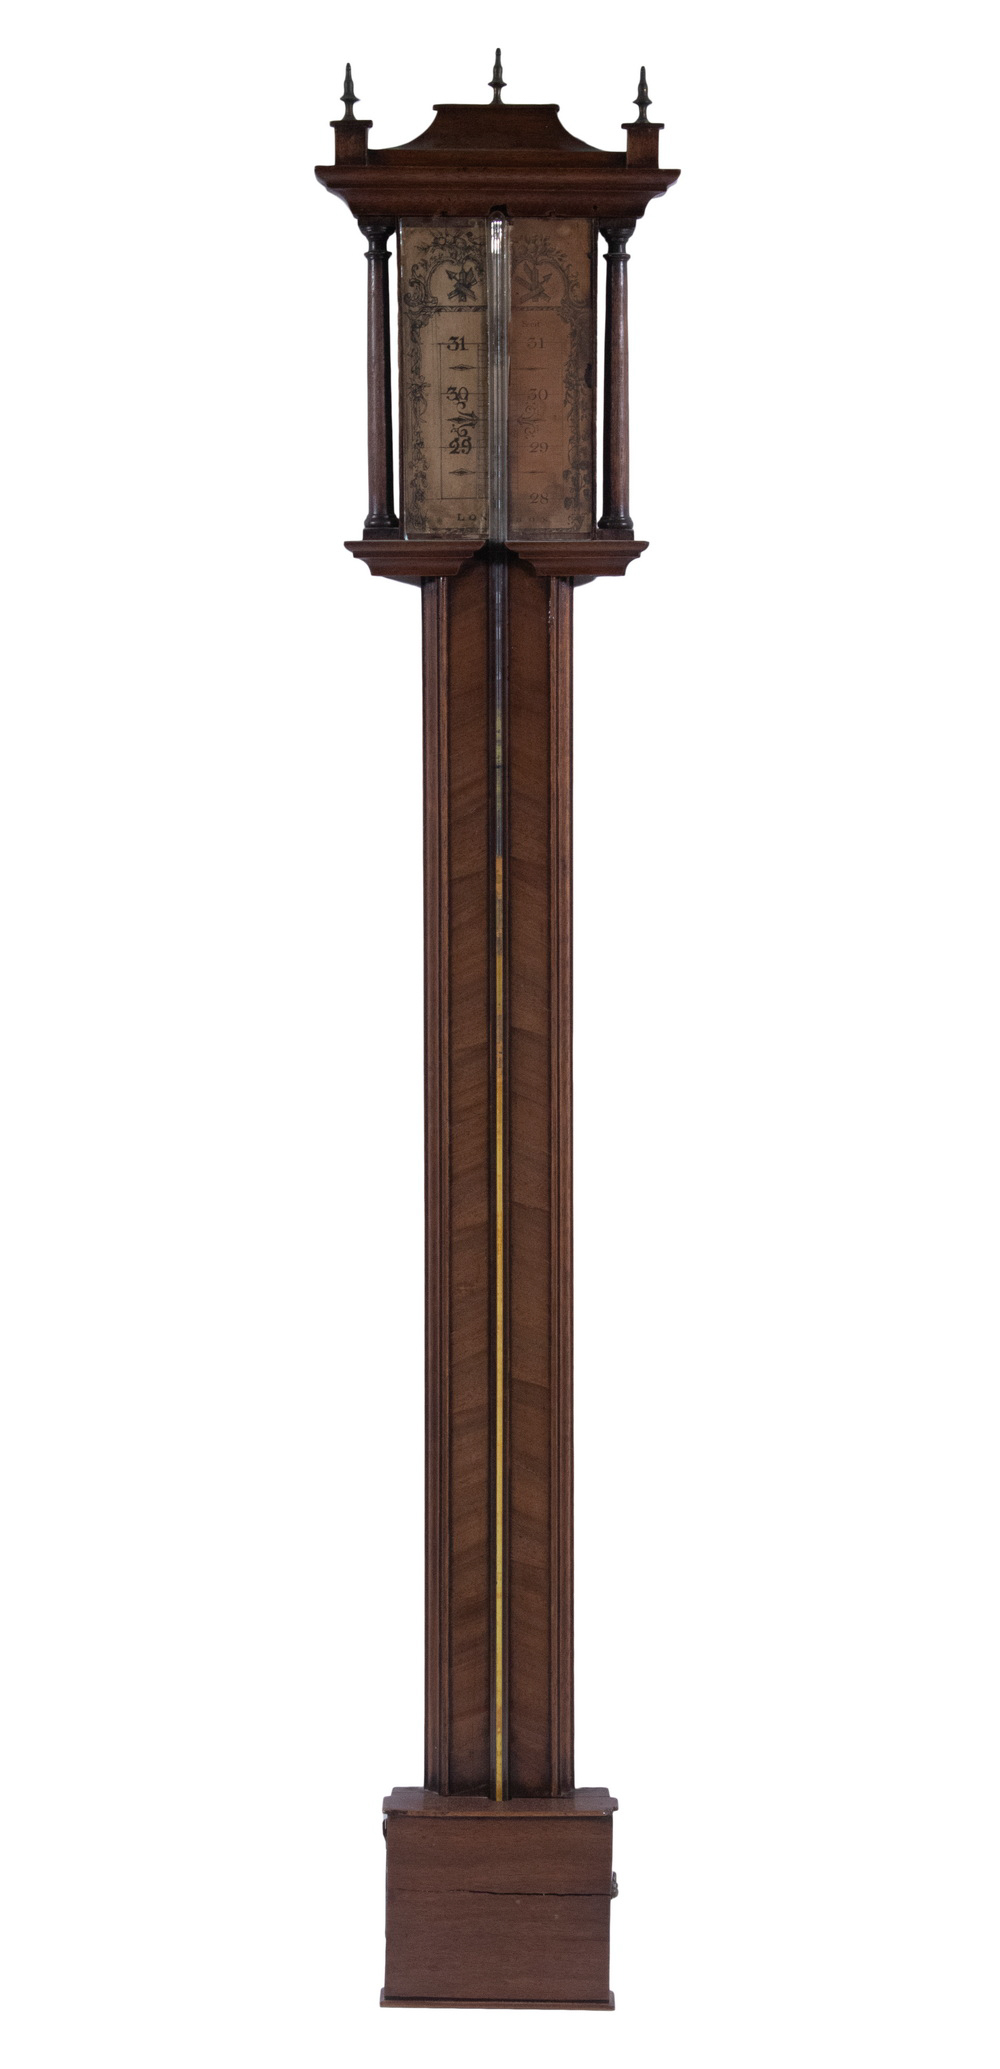 EARLY ENGLISH BAROMETER 18th c  302894